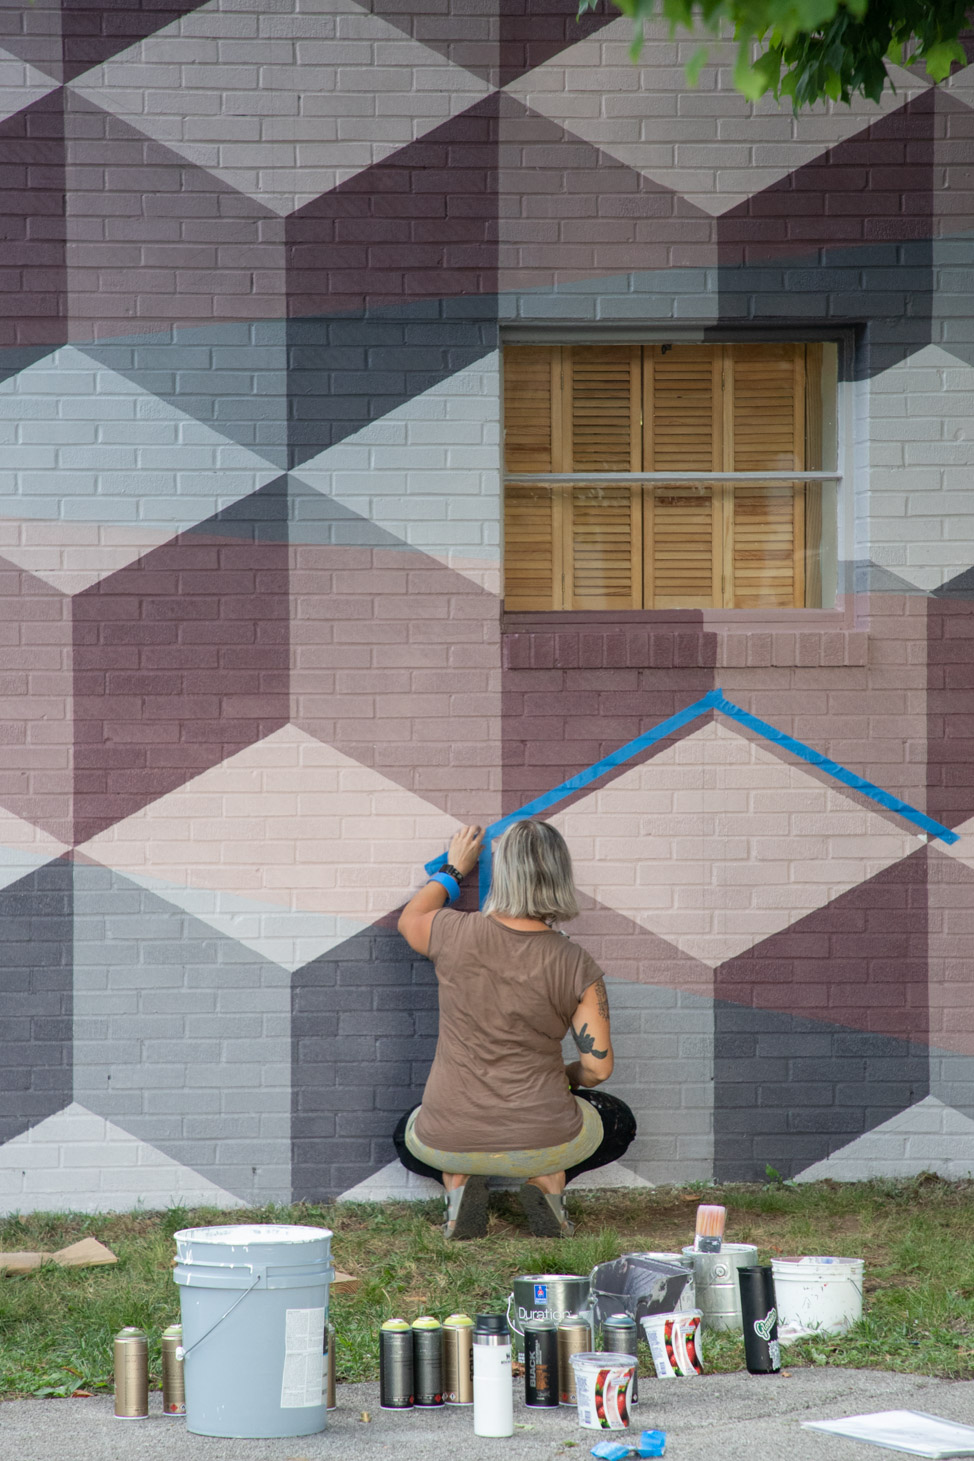 Hebe mural in McMinnville, Tennessee